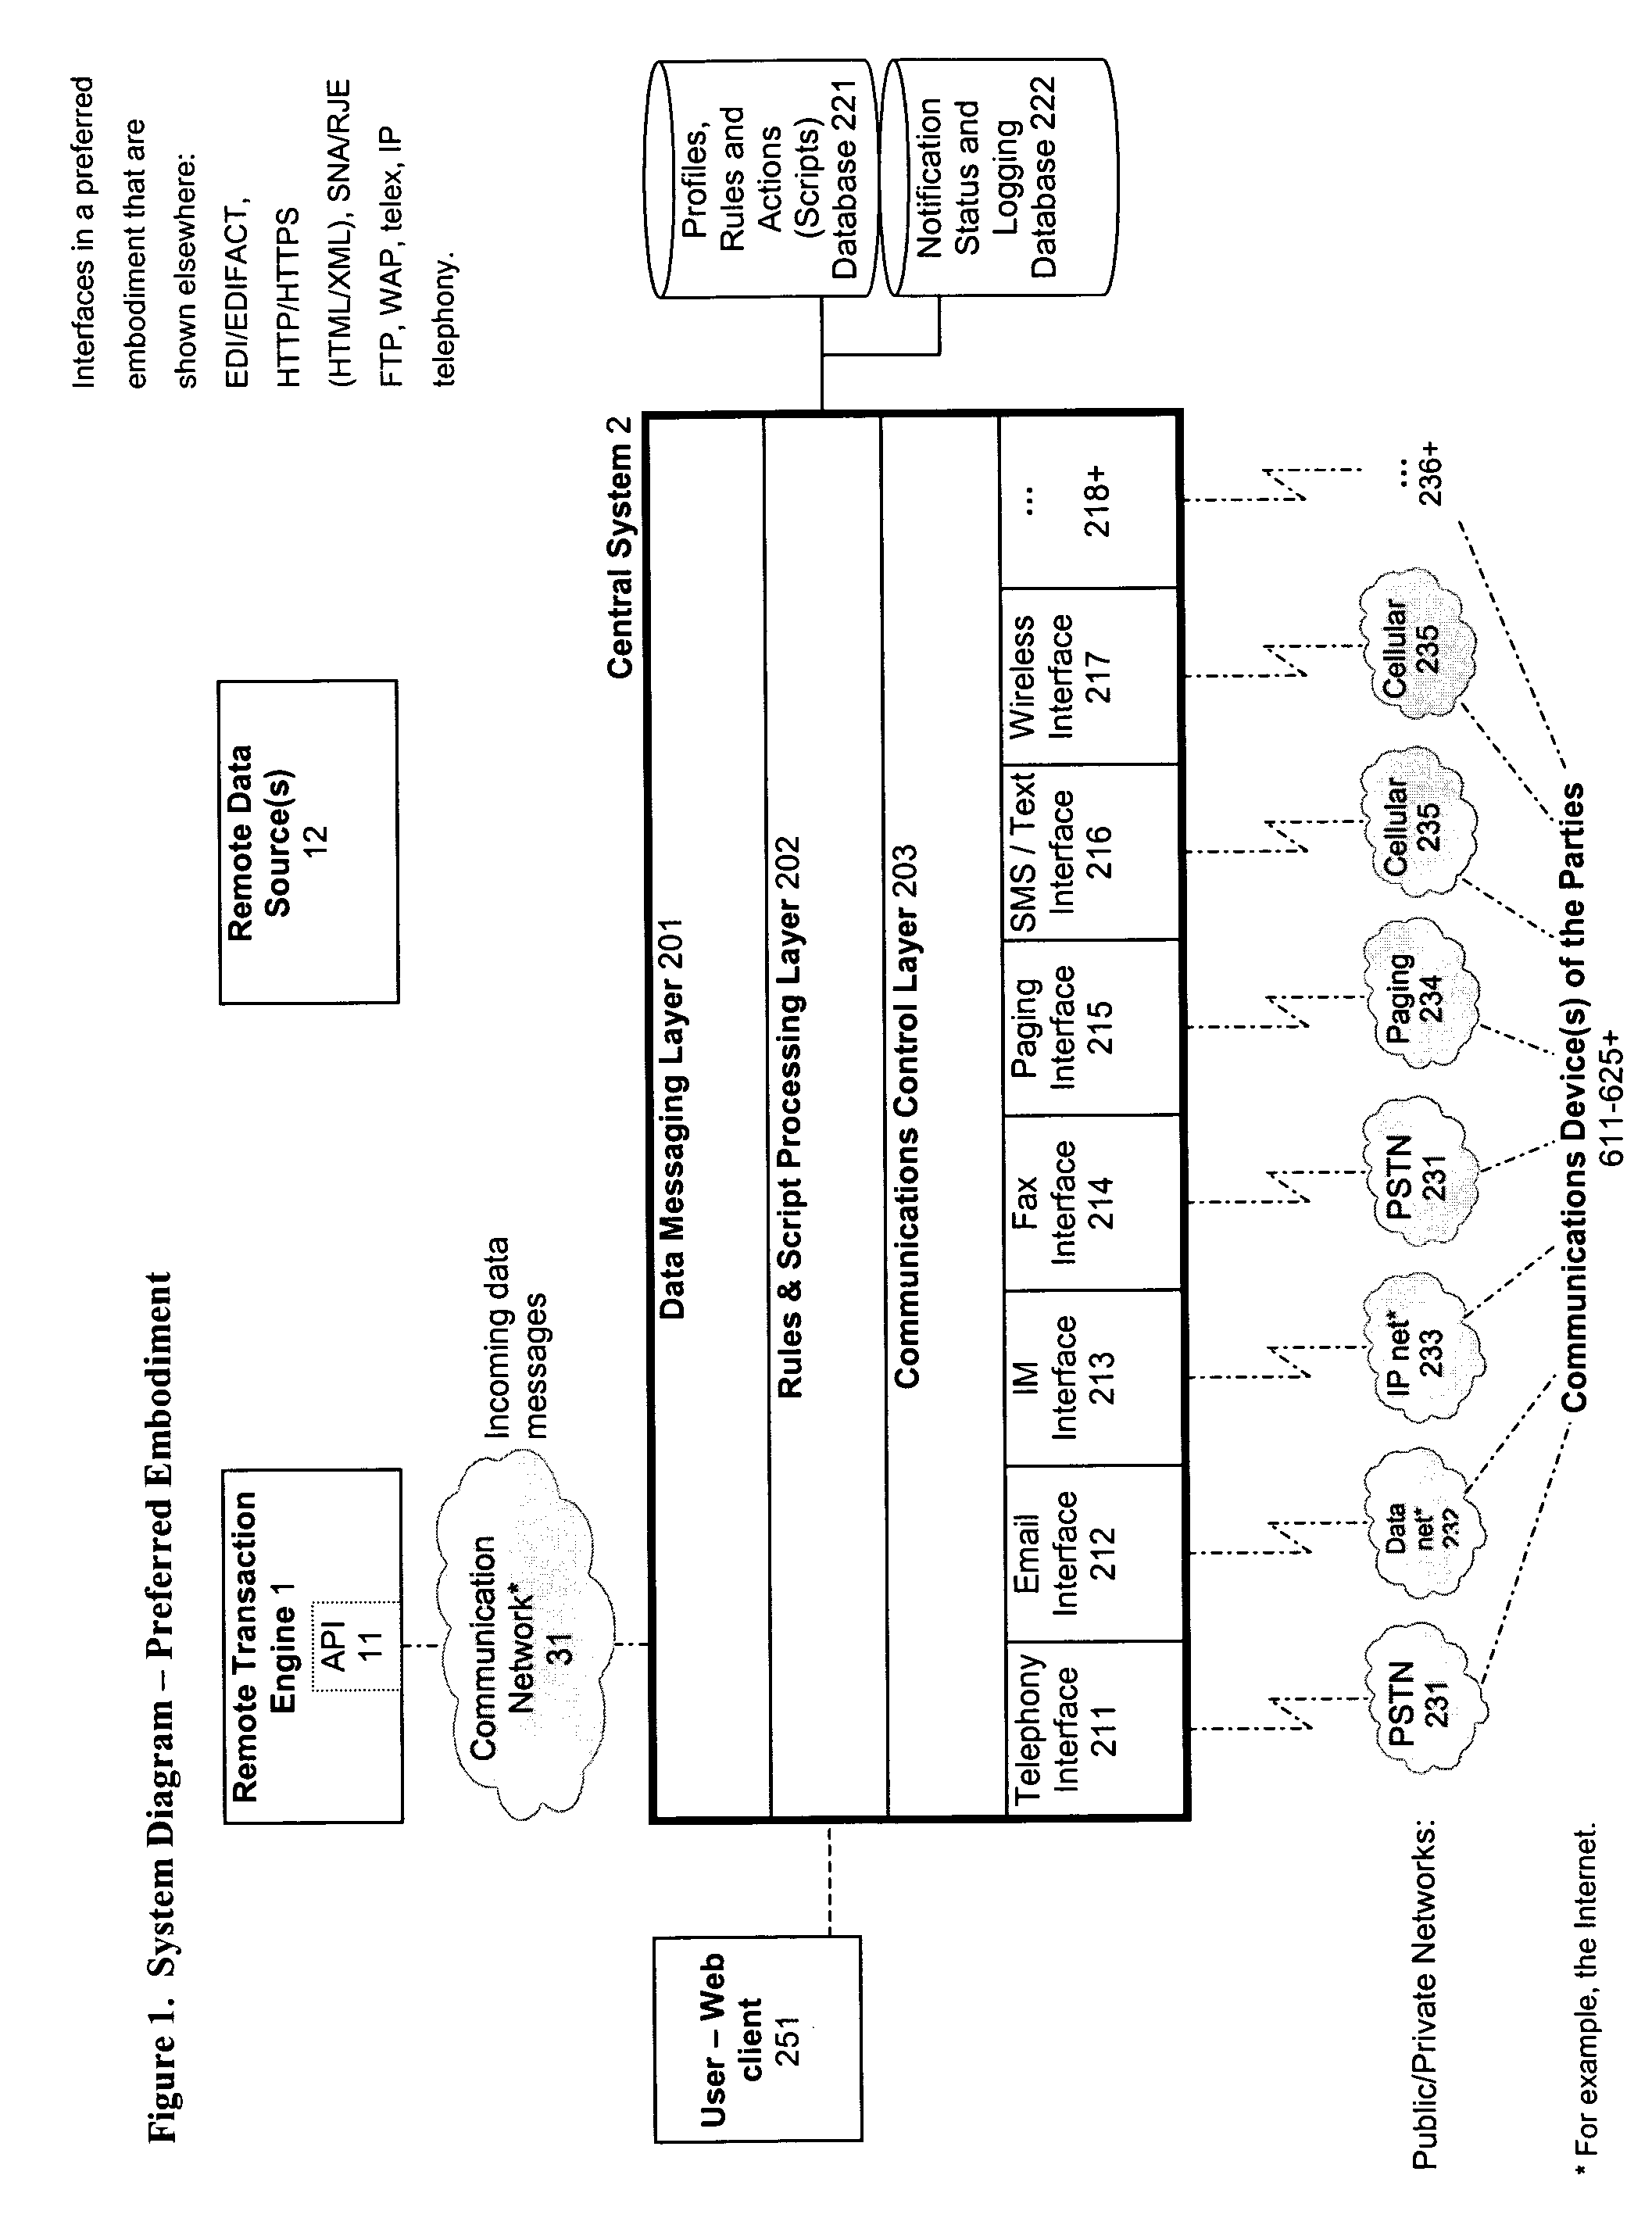 System and method for verification, authentication, and notification of a transaction